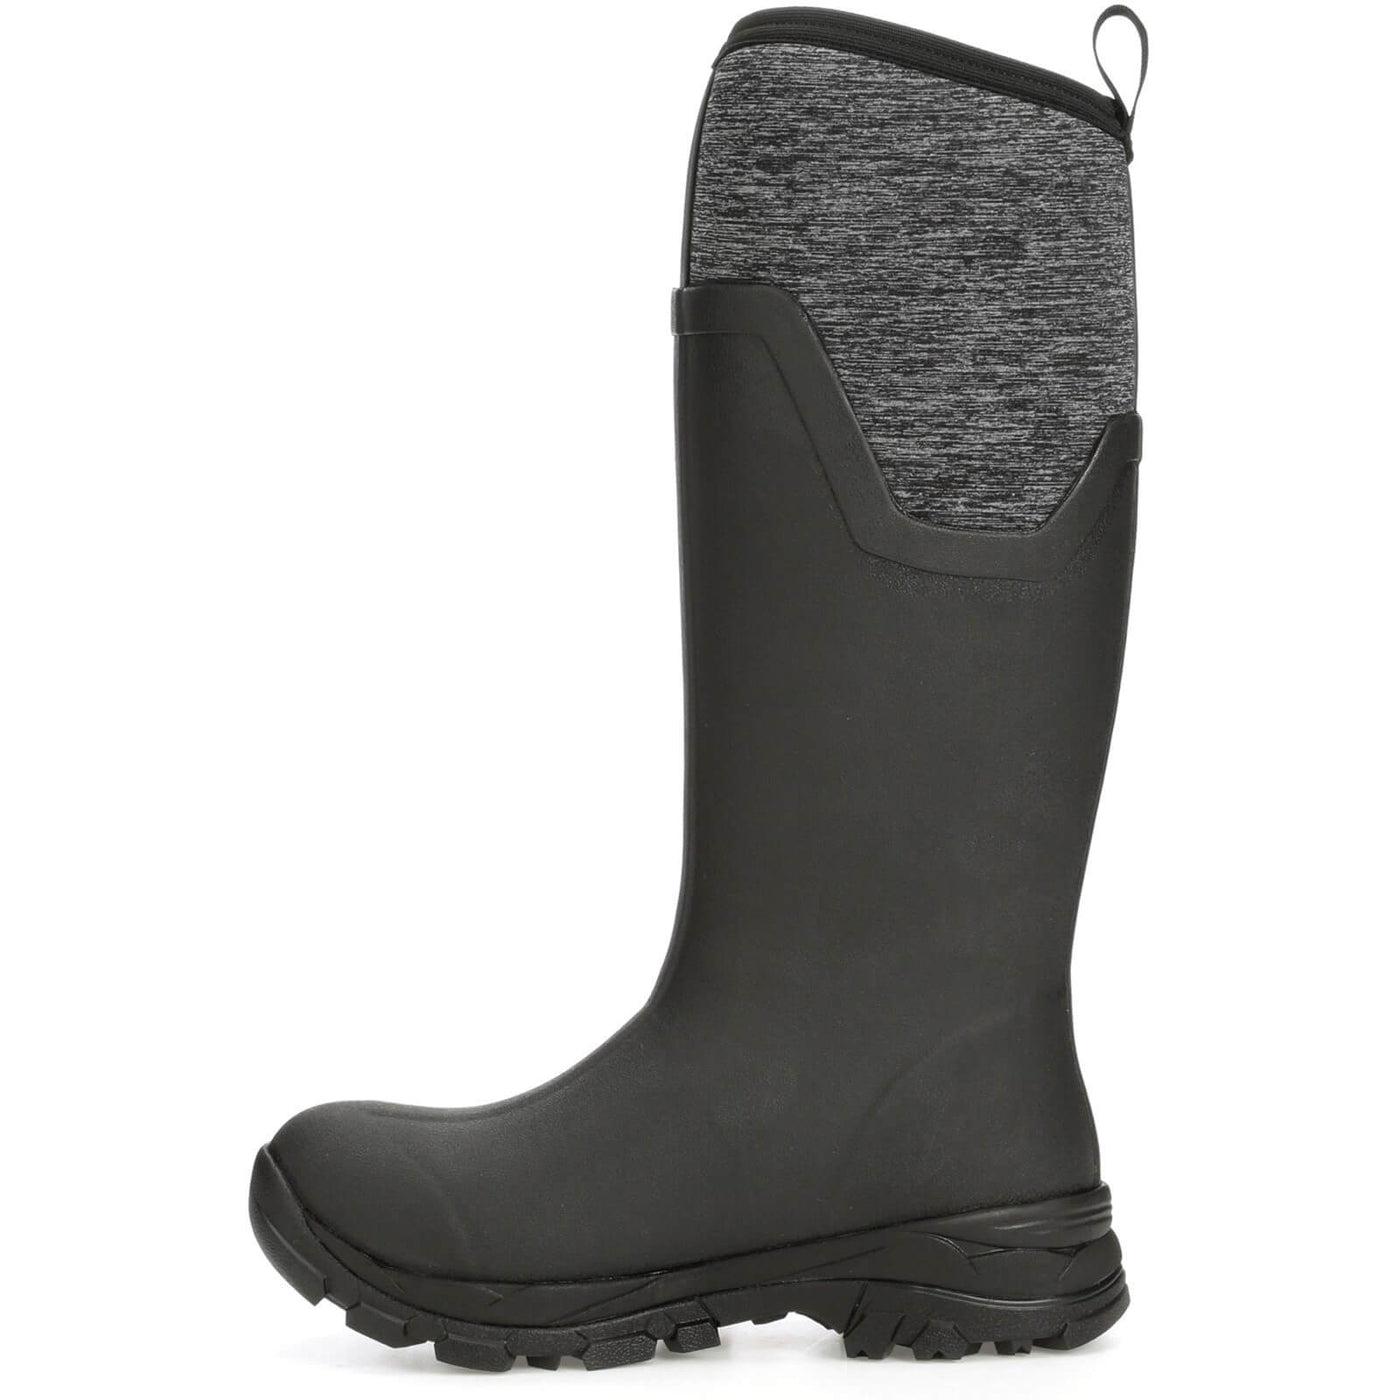 Muck Boots Arctic Ice Tall Wellington Boots Black/Jersey Heather 7#colour_black-jersey-heather